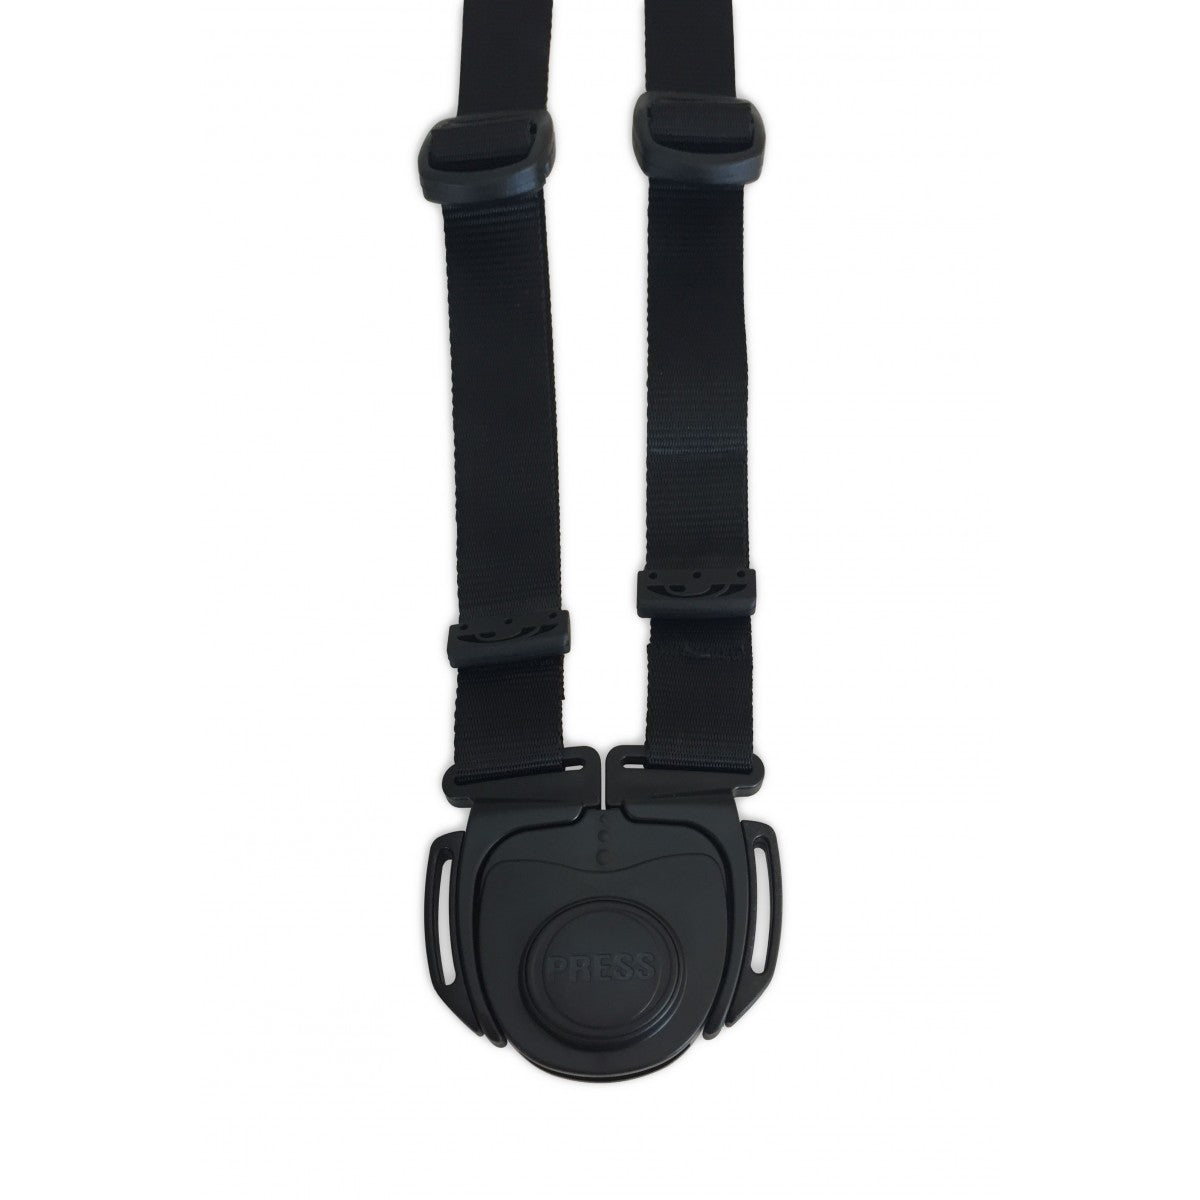 Buckle Clip Safety Harness Replacement for Stroller Jogger